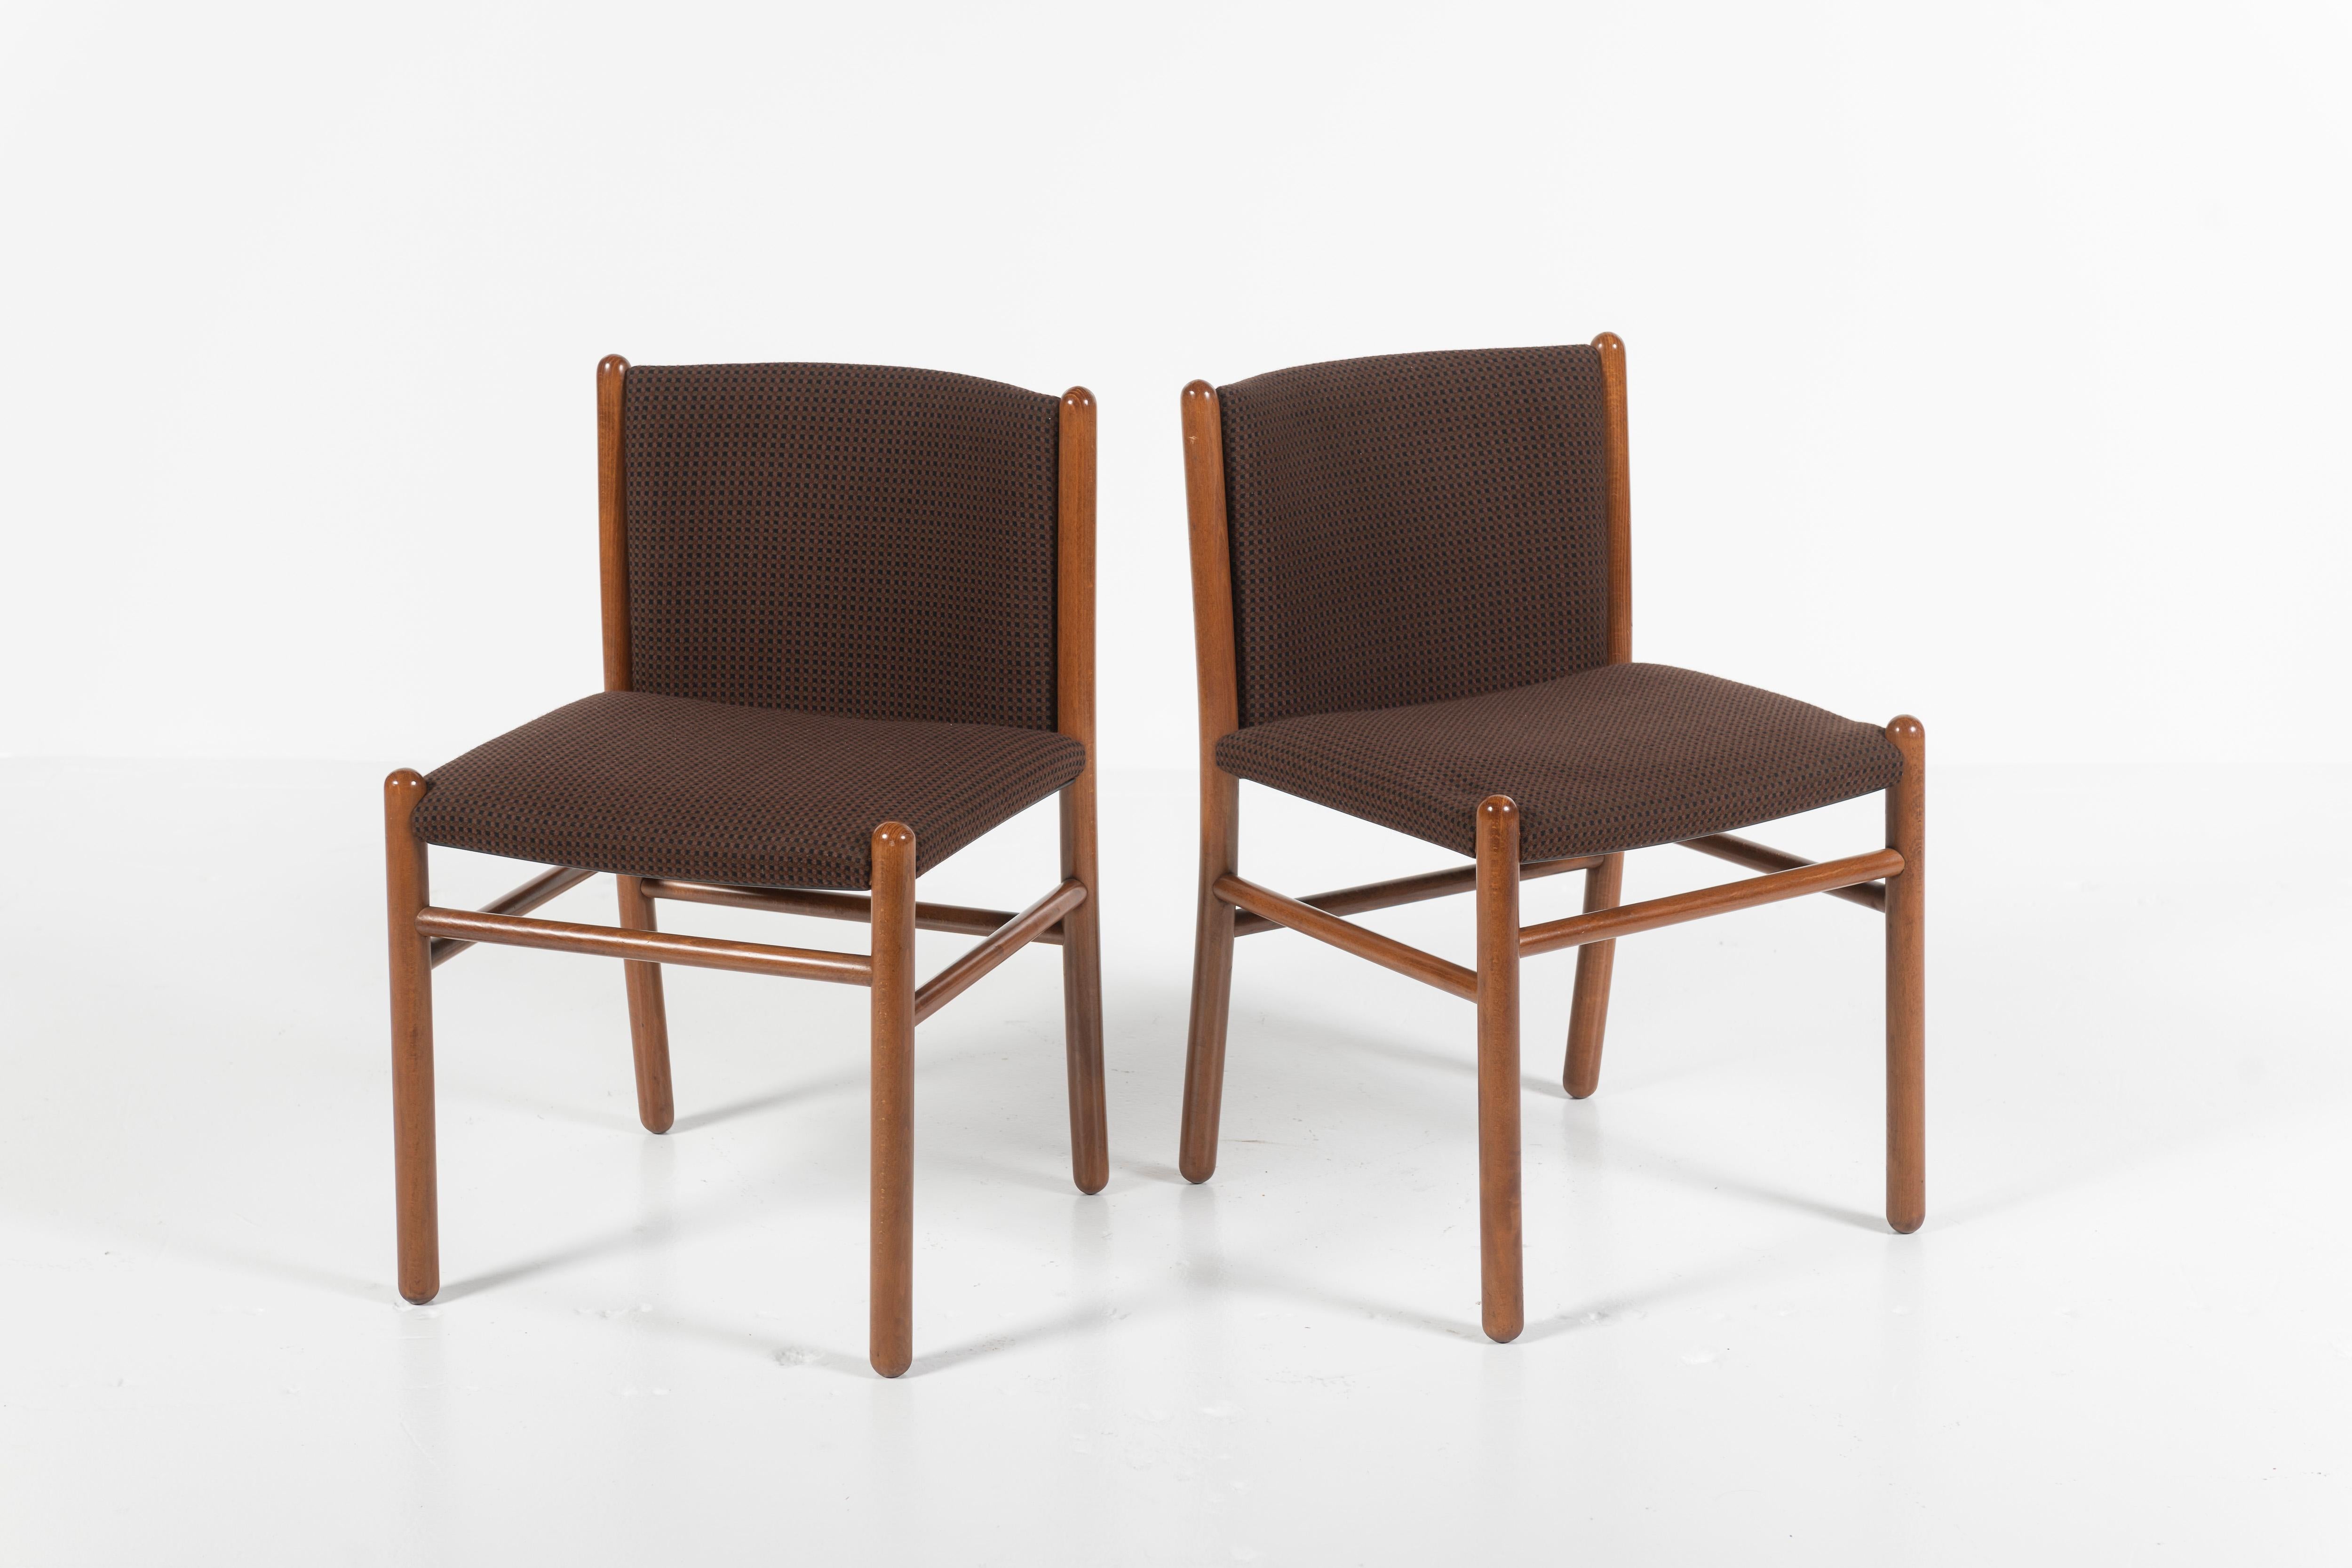 Set of Four Mid-Century Modern Dining Chairs, Gianfranco Frattini, Italy, 1960s For Sale 1